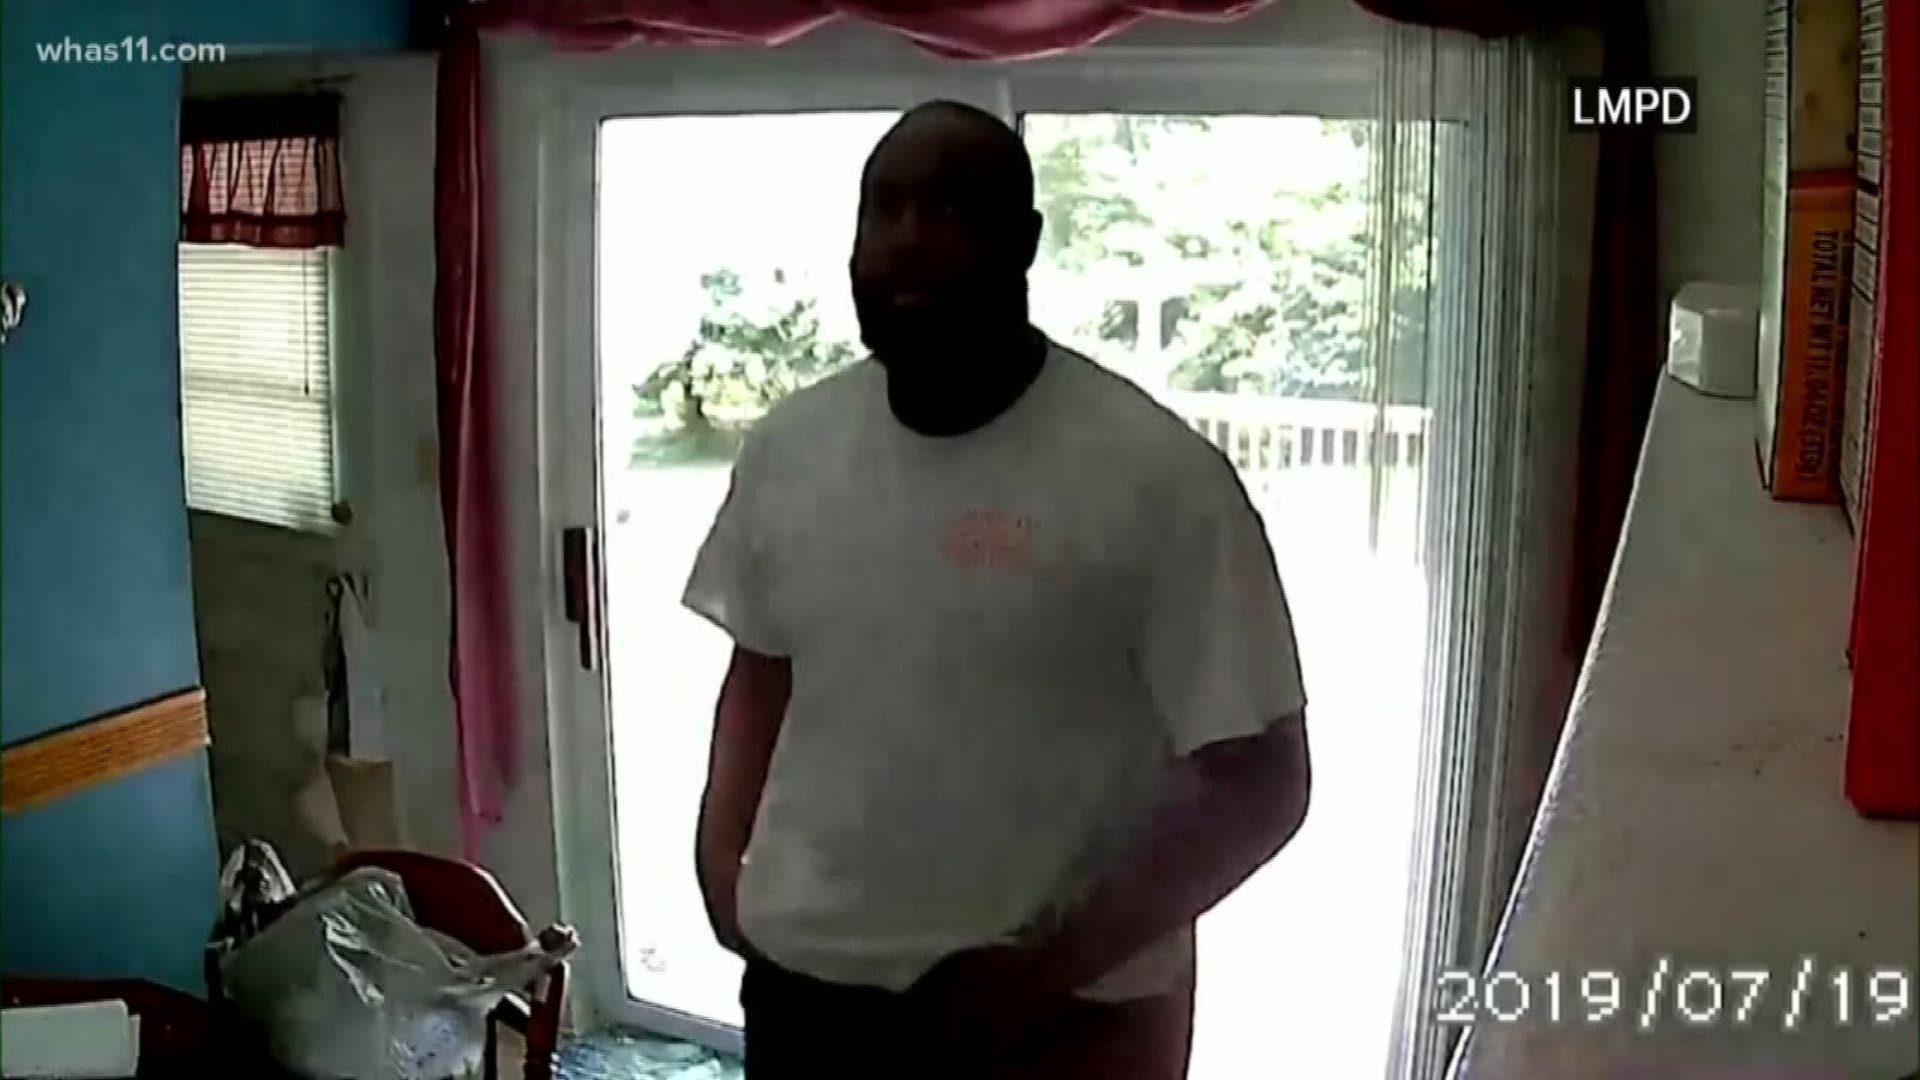 Police are looking for two suspects after they broke into a home on Seatonville Road on July 19.